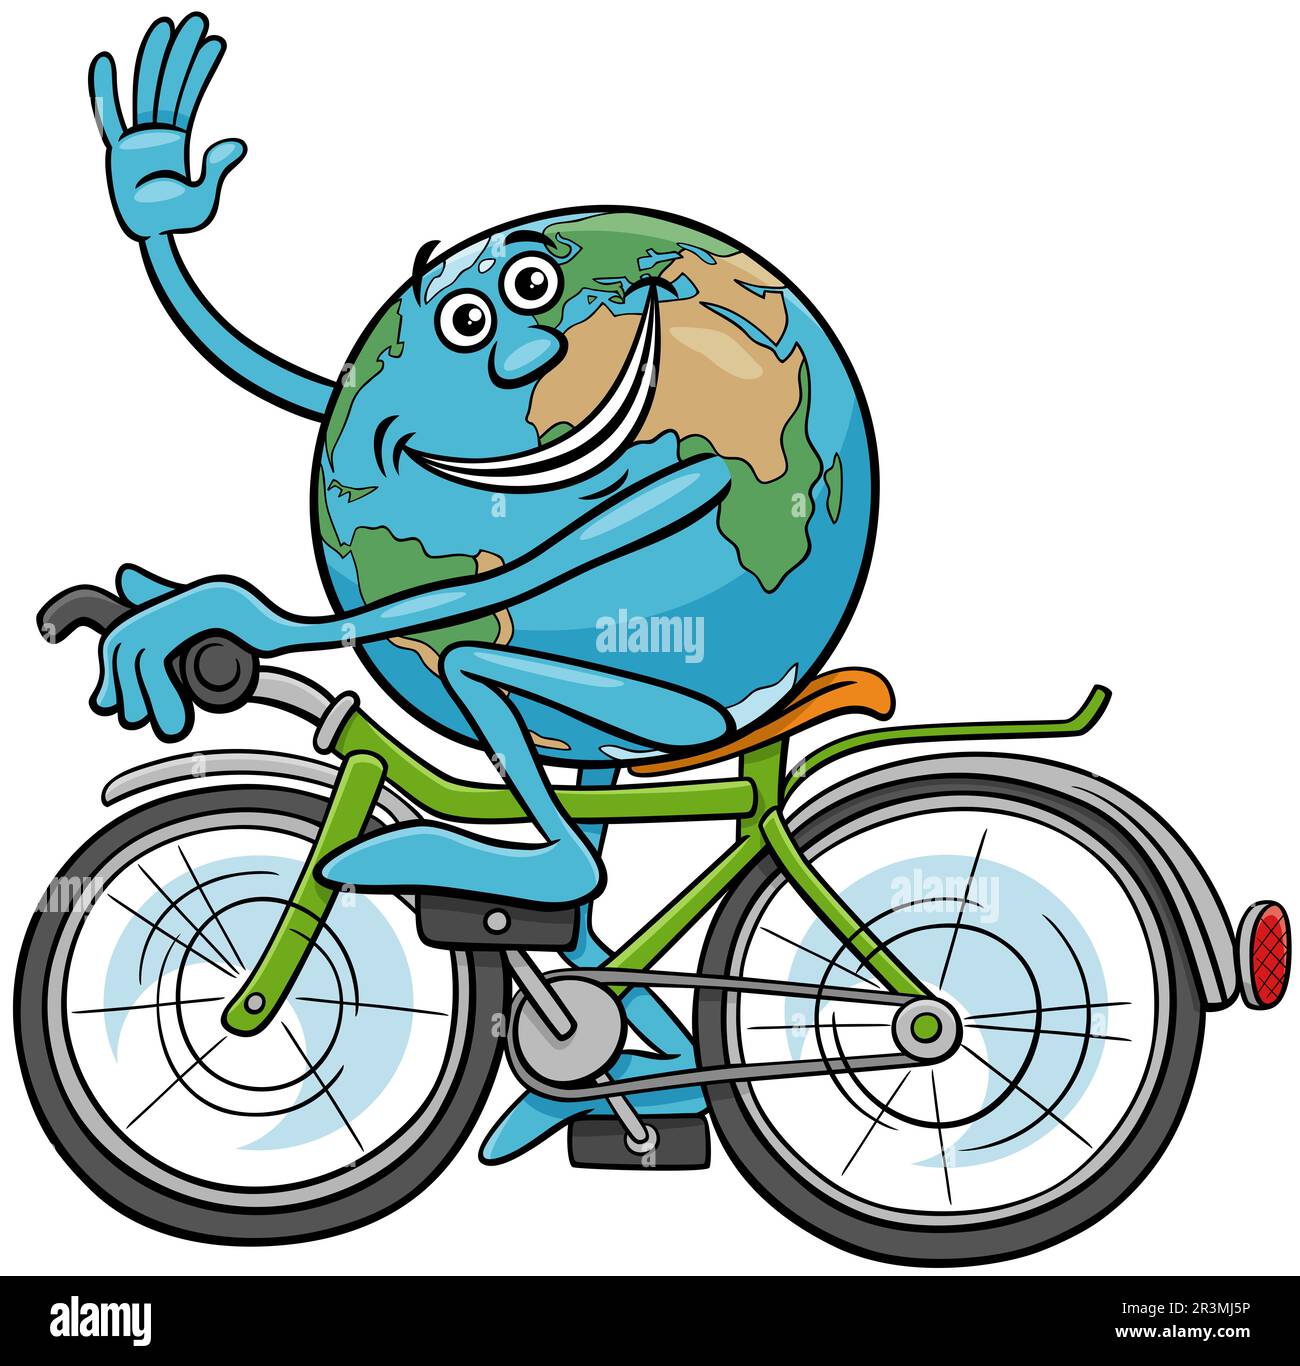 Cartoon illustration of Earth riding a bicycle Stock Photo